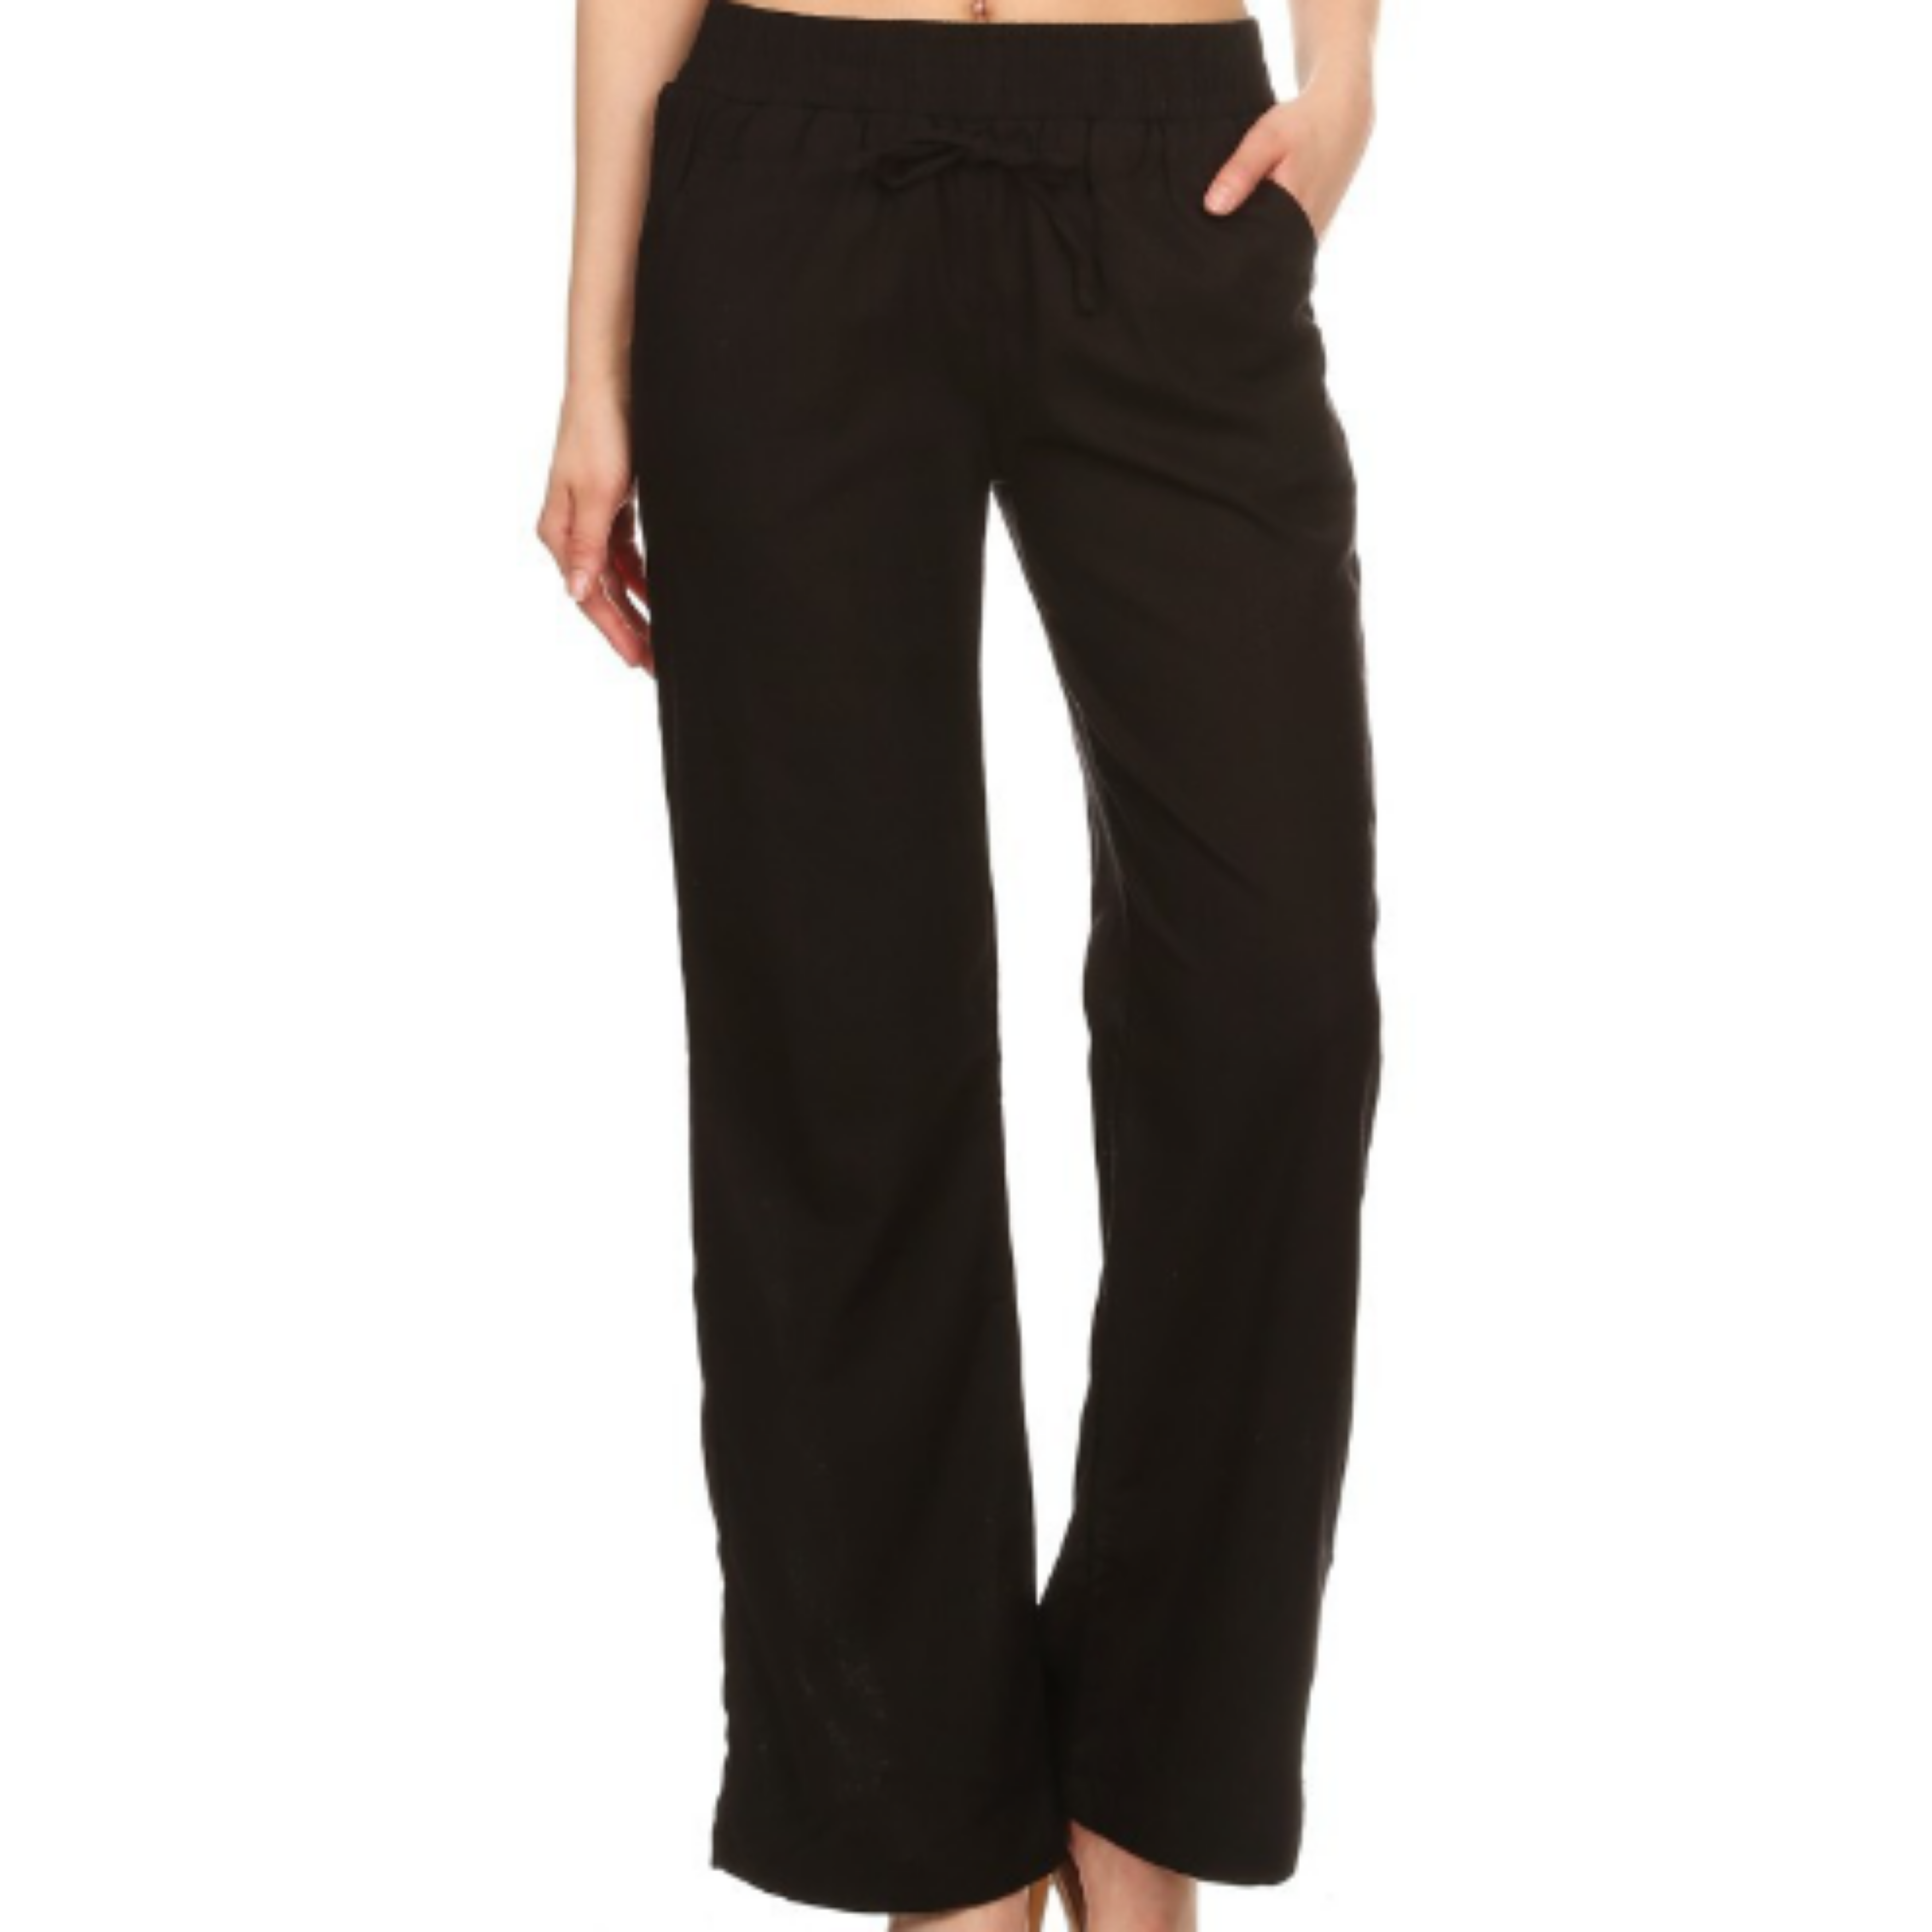 Flare Linen Blend Pants - Ariya's Apparel and Accessories